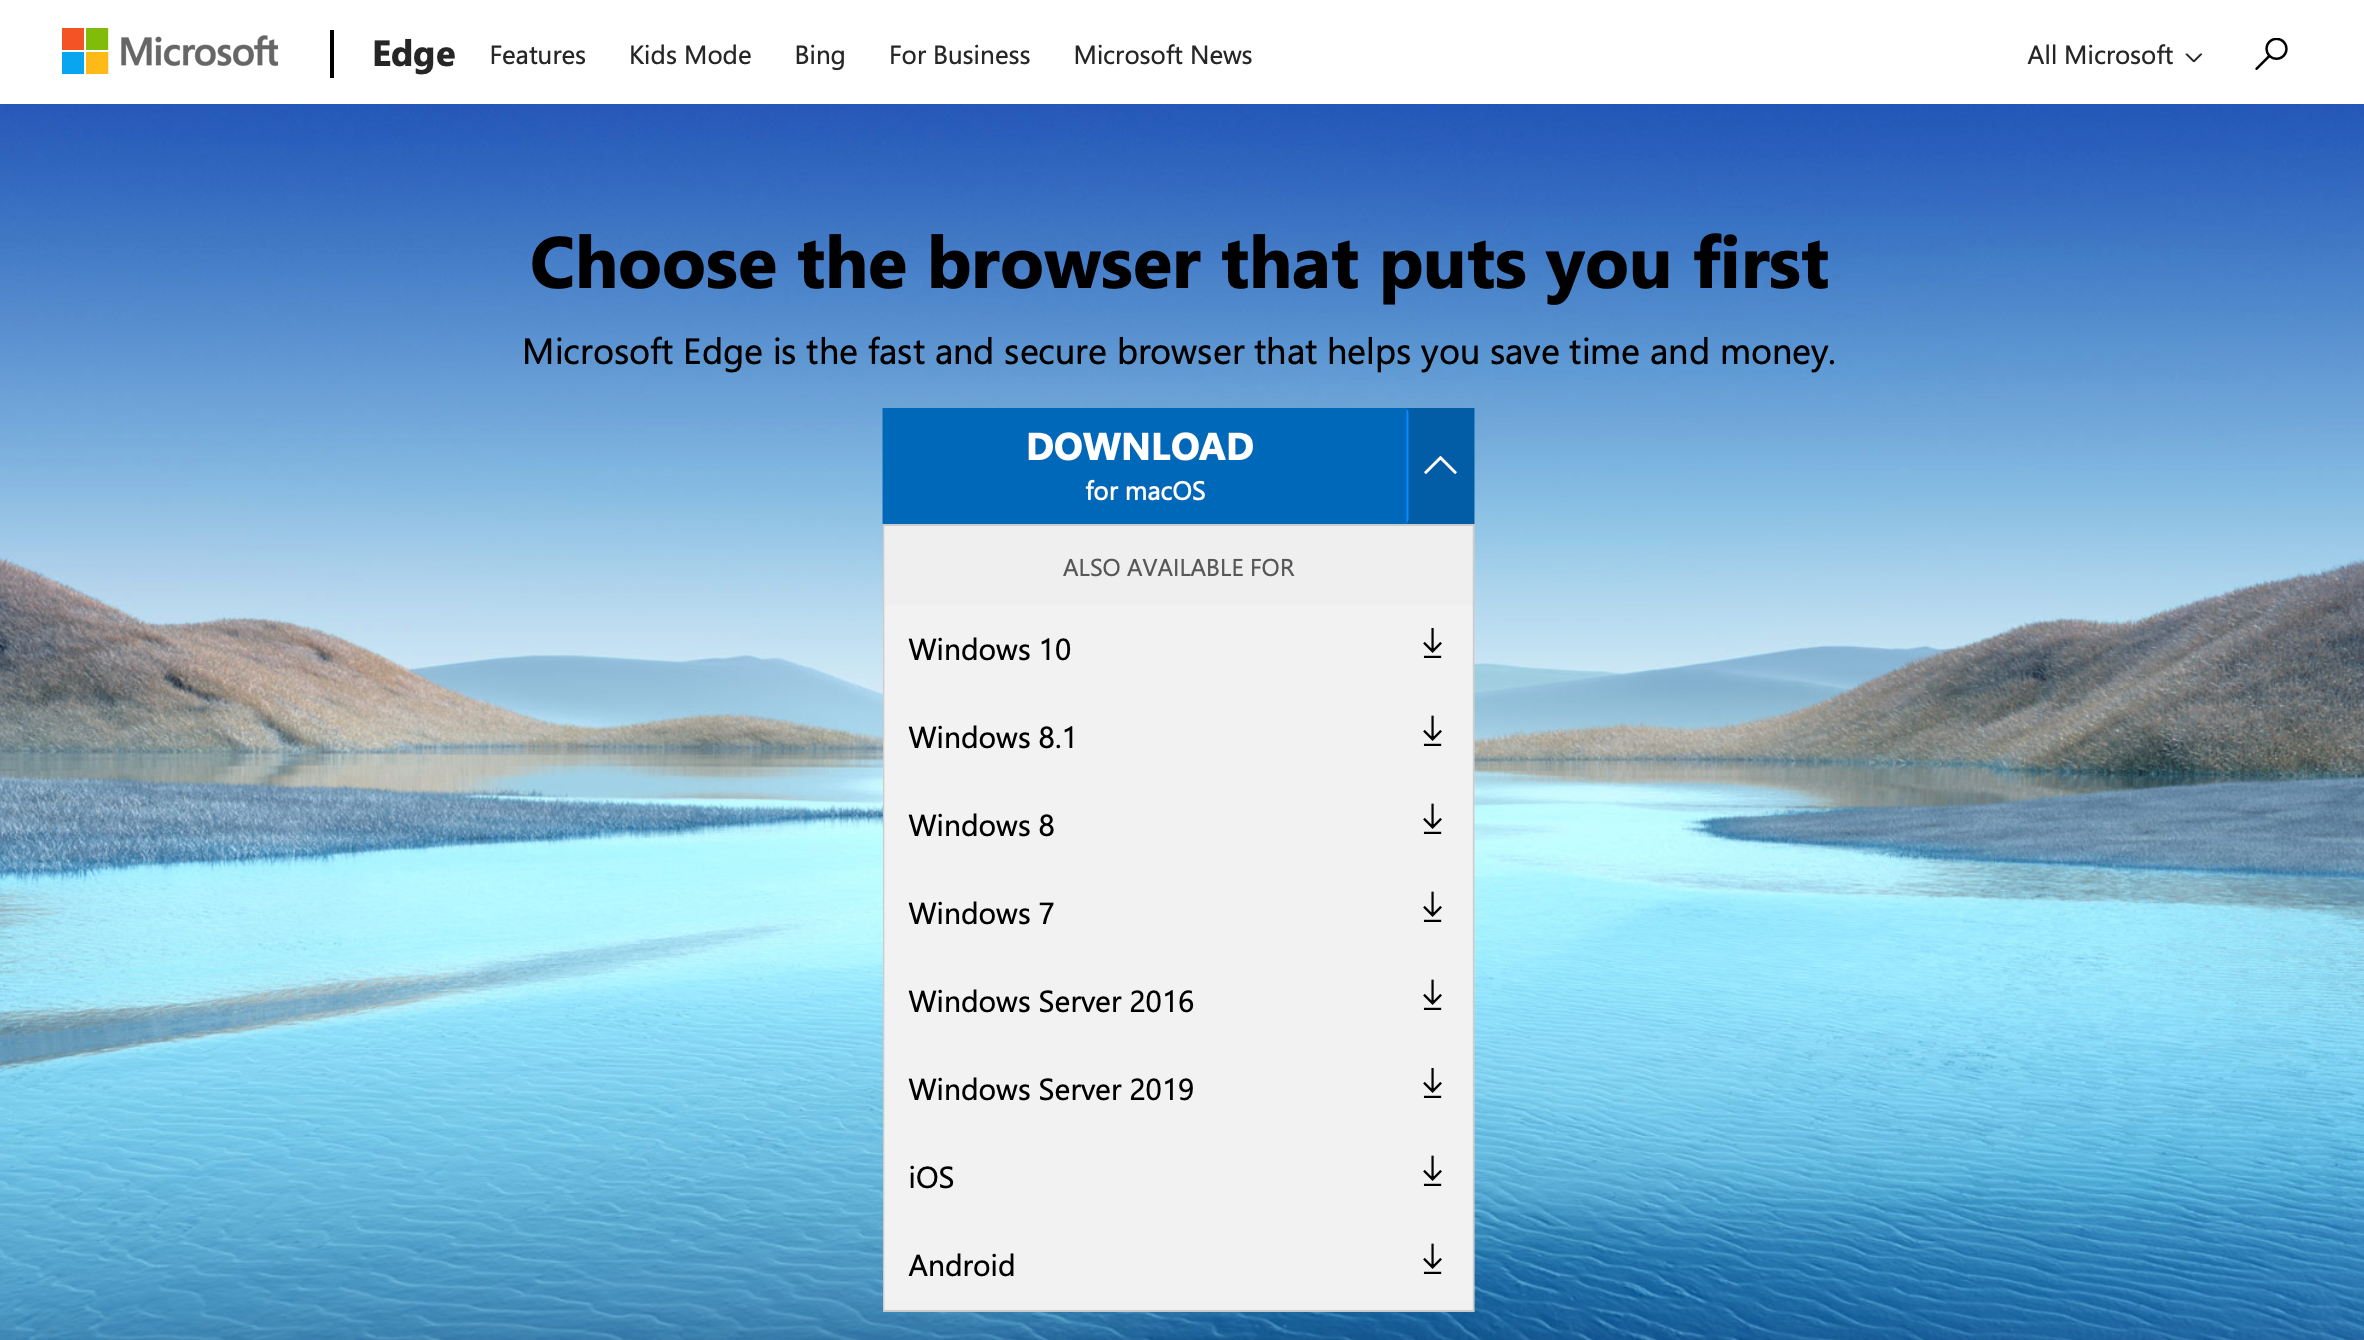 The download options on the Microsoft Edge website--macOS is selected